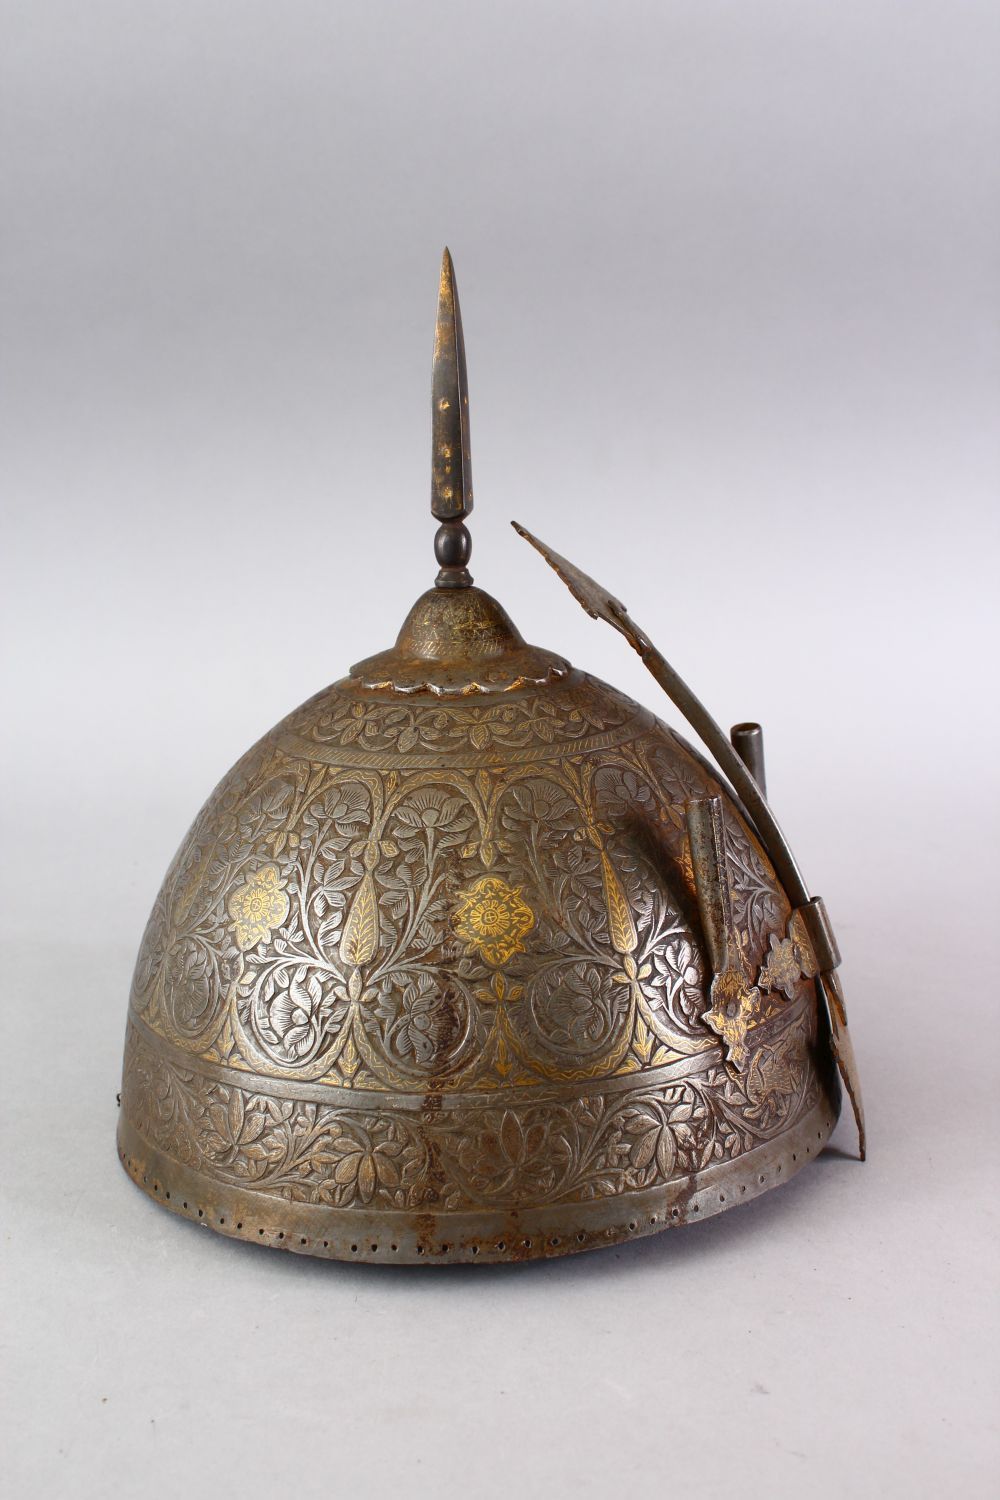 A 19TH CENTURY INDO PERSIAN GOLD & SILVER INLAID STEEL HELMET, decorated with carved formal floral - Image 3 of 7